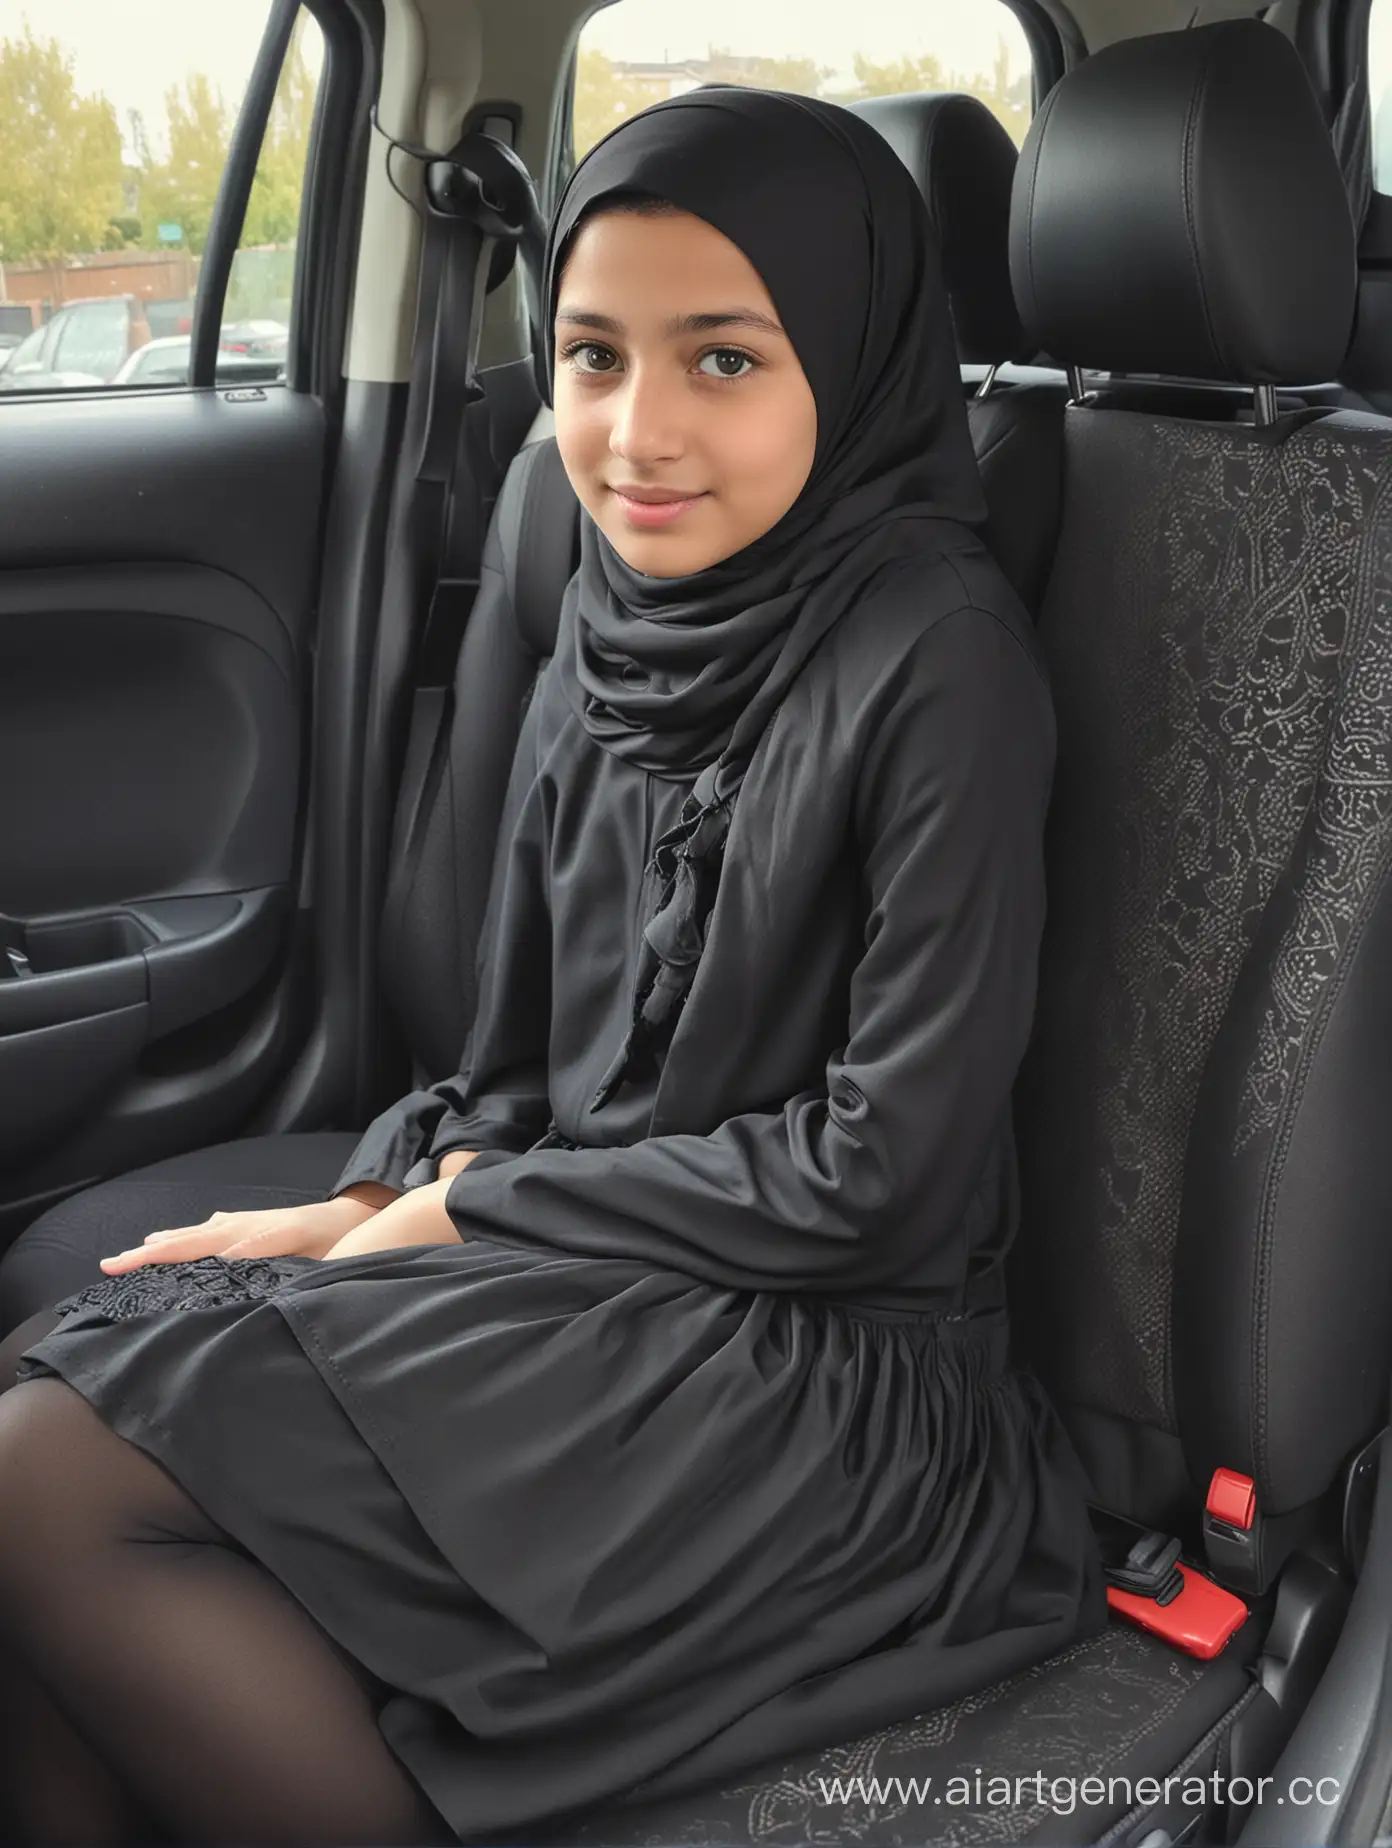 A little girl, 12 years old, hijab, mini school skirt, black opaque tights, sits on the car seat , from driver side